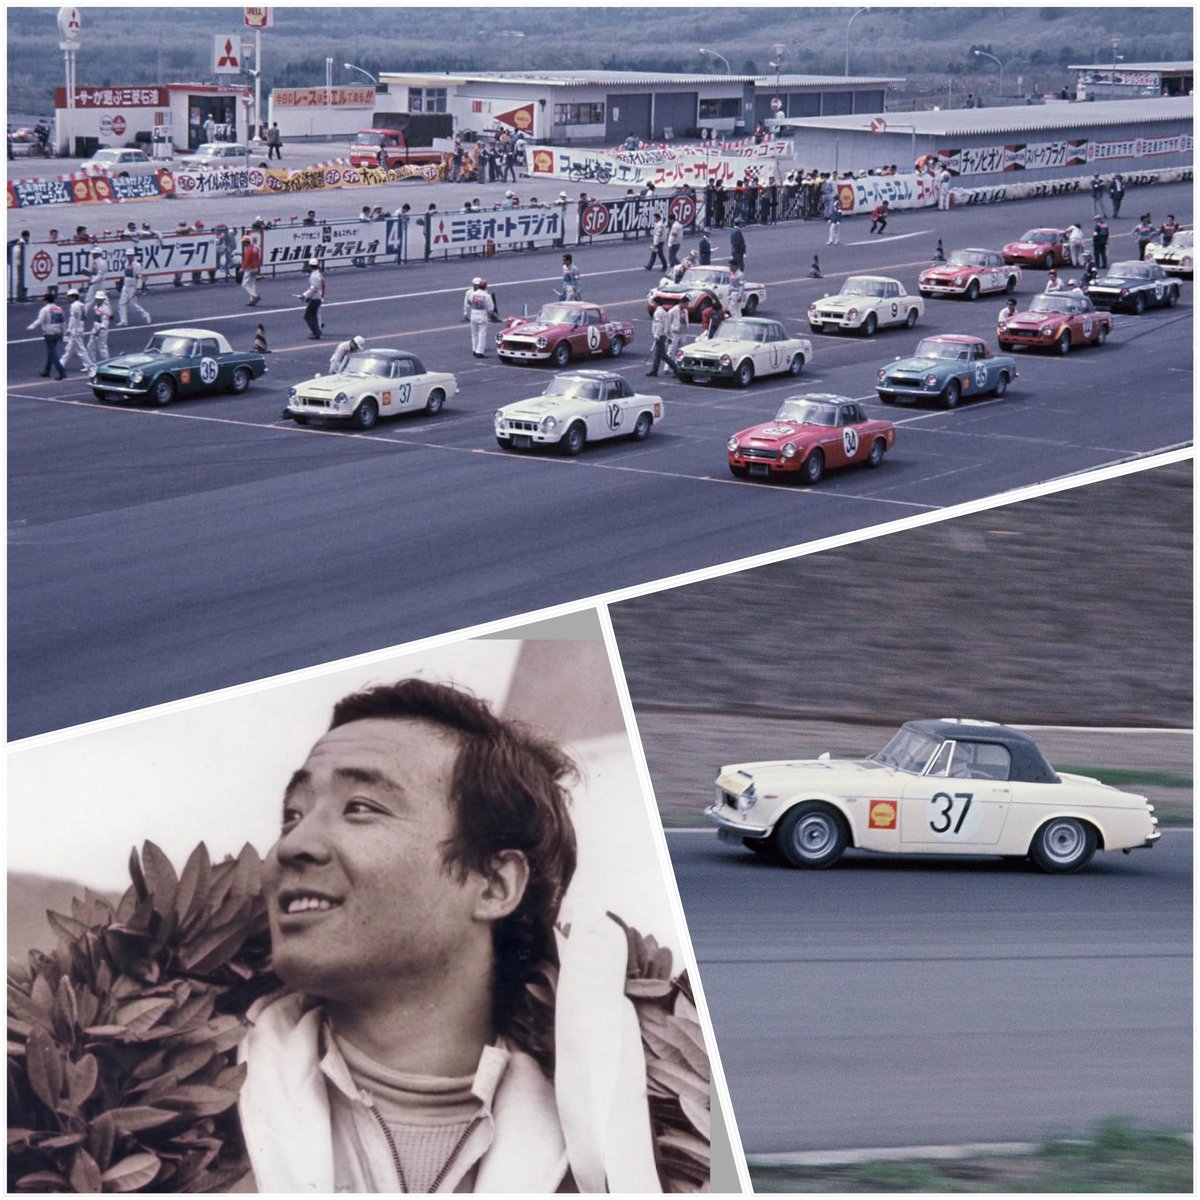 RIP Kenji Tohira, legendary Nissan factory driver for over 30 years. His big break came after victory in a Datsun Fairlady 2000 at the 1968 Japan GP meeting - check out that grid! He was signed to Nissan a year later. Highlights here: tohira-official-site.crayonsite.com/p/5/ #FairladyFriday